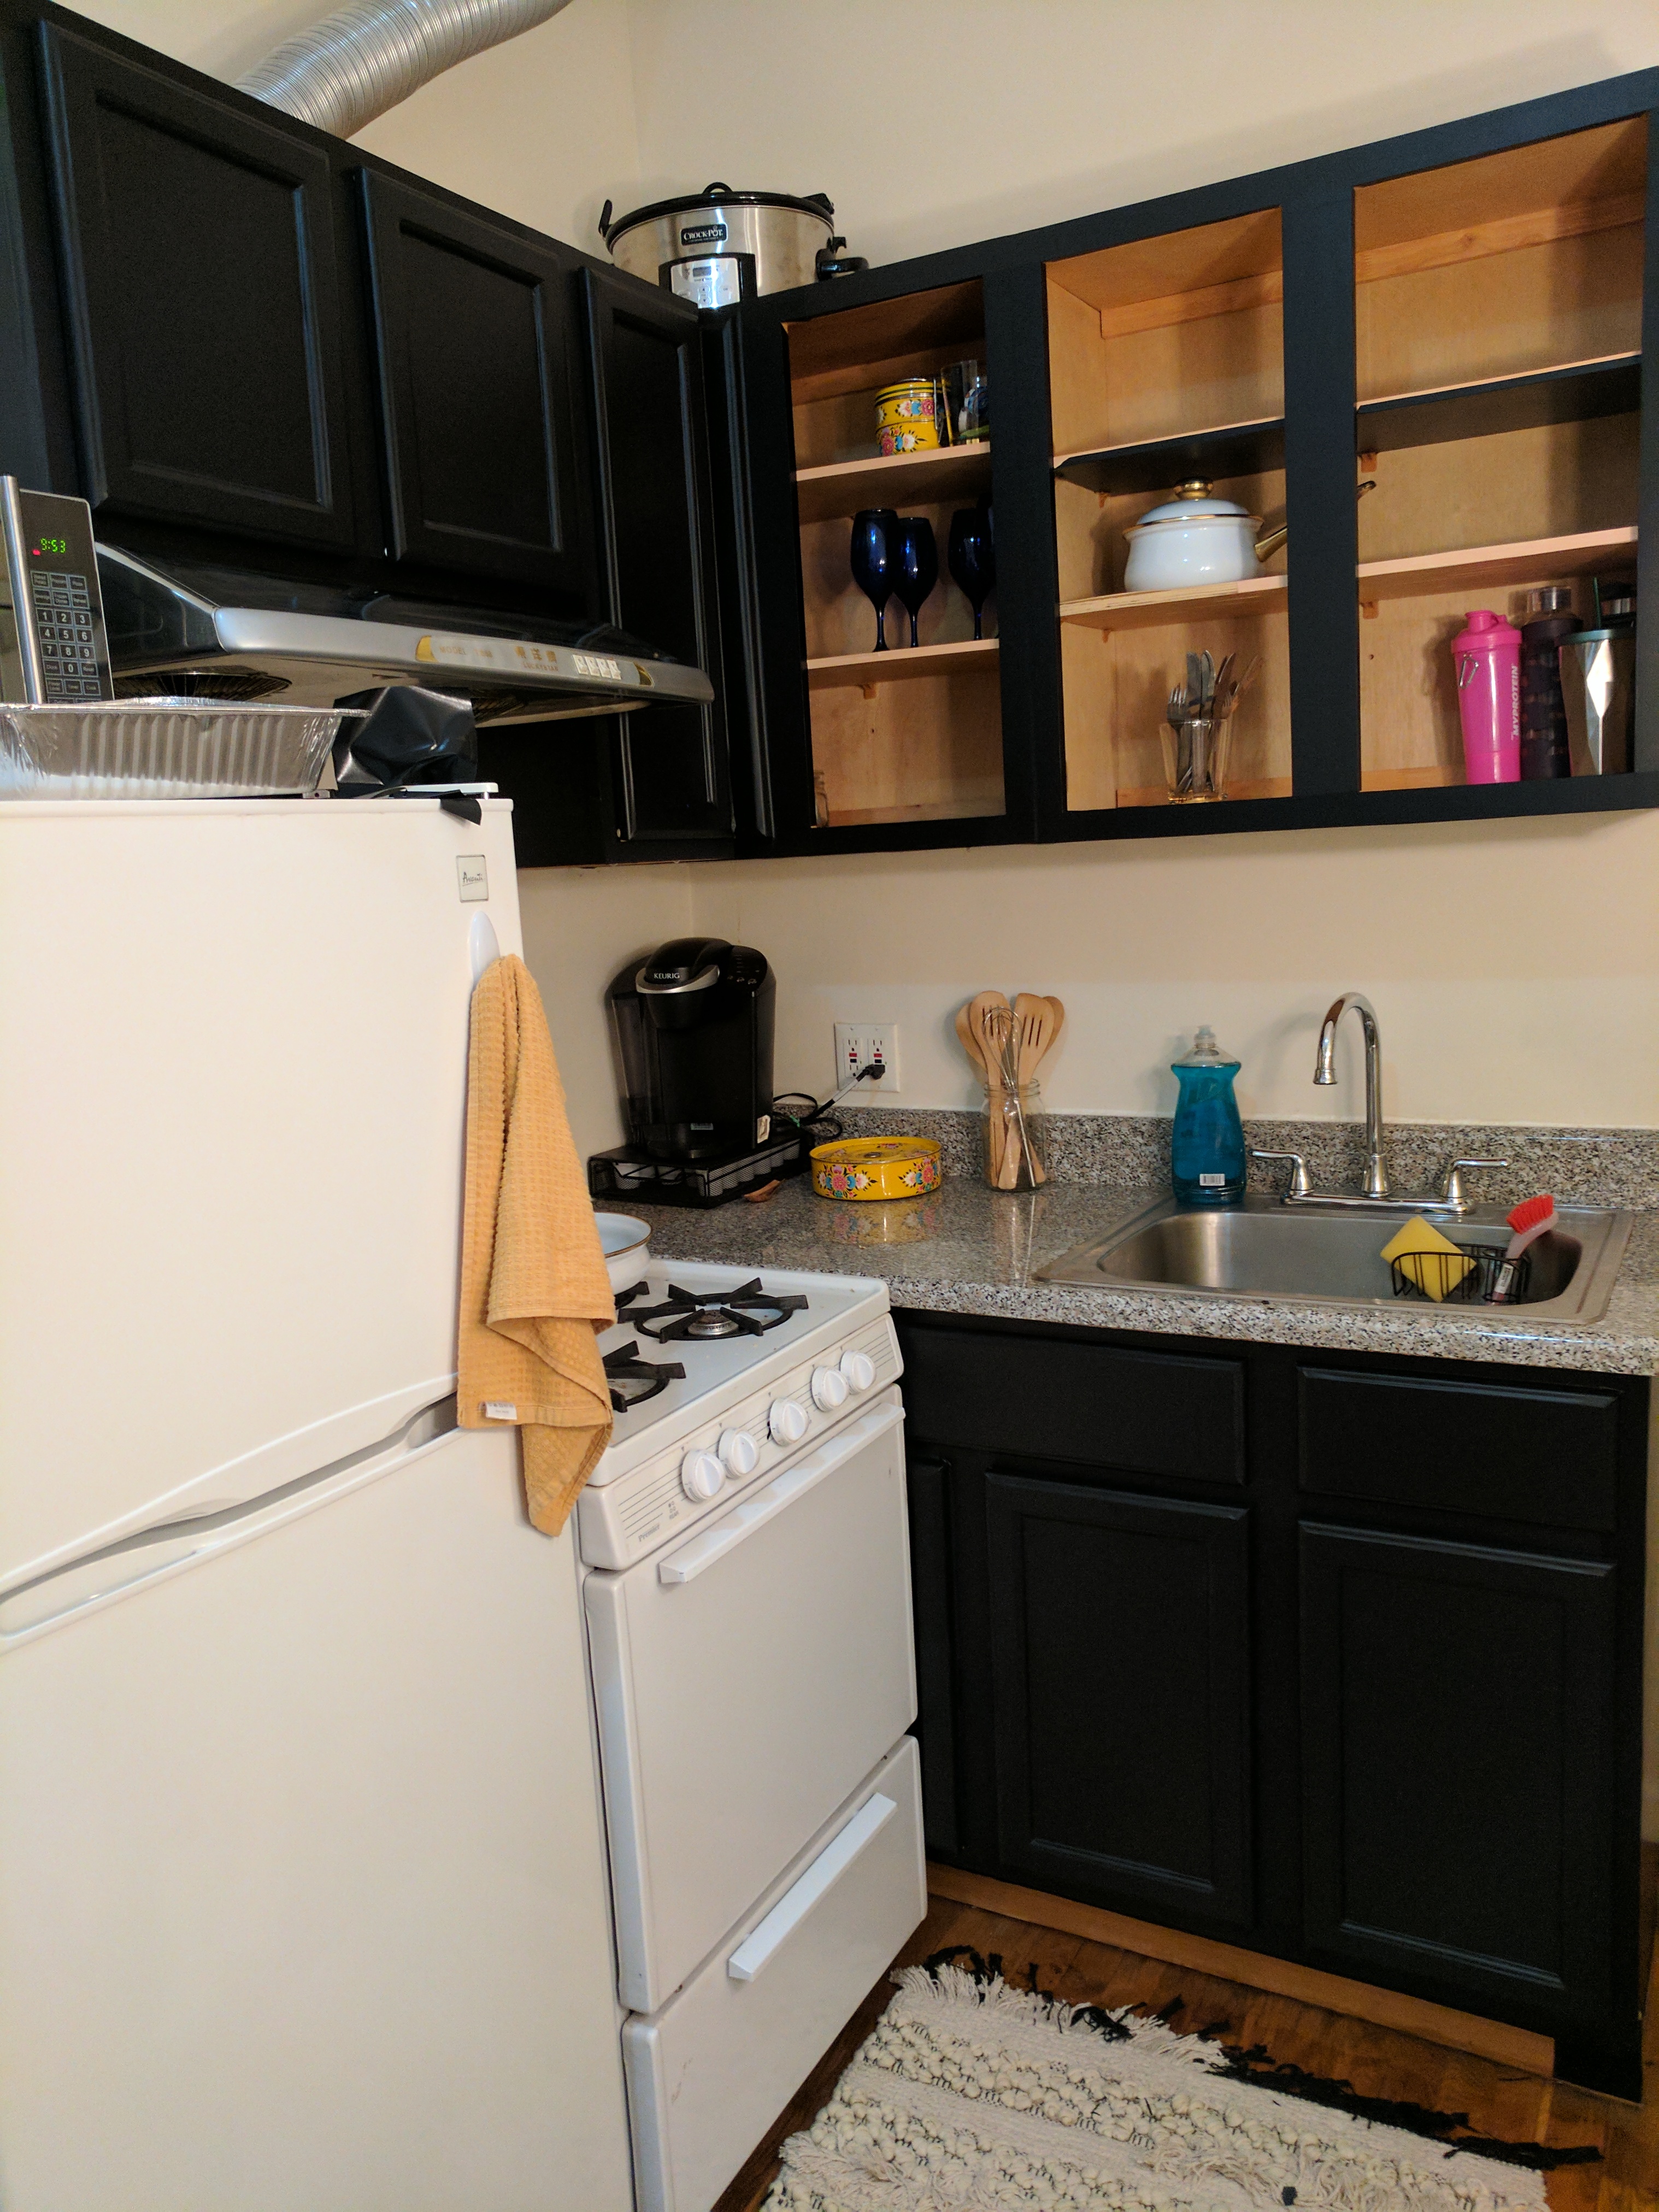 Diy Contact Paper Kitchen Update Part 1, Will Contact Paper Ruin Cabinets